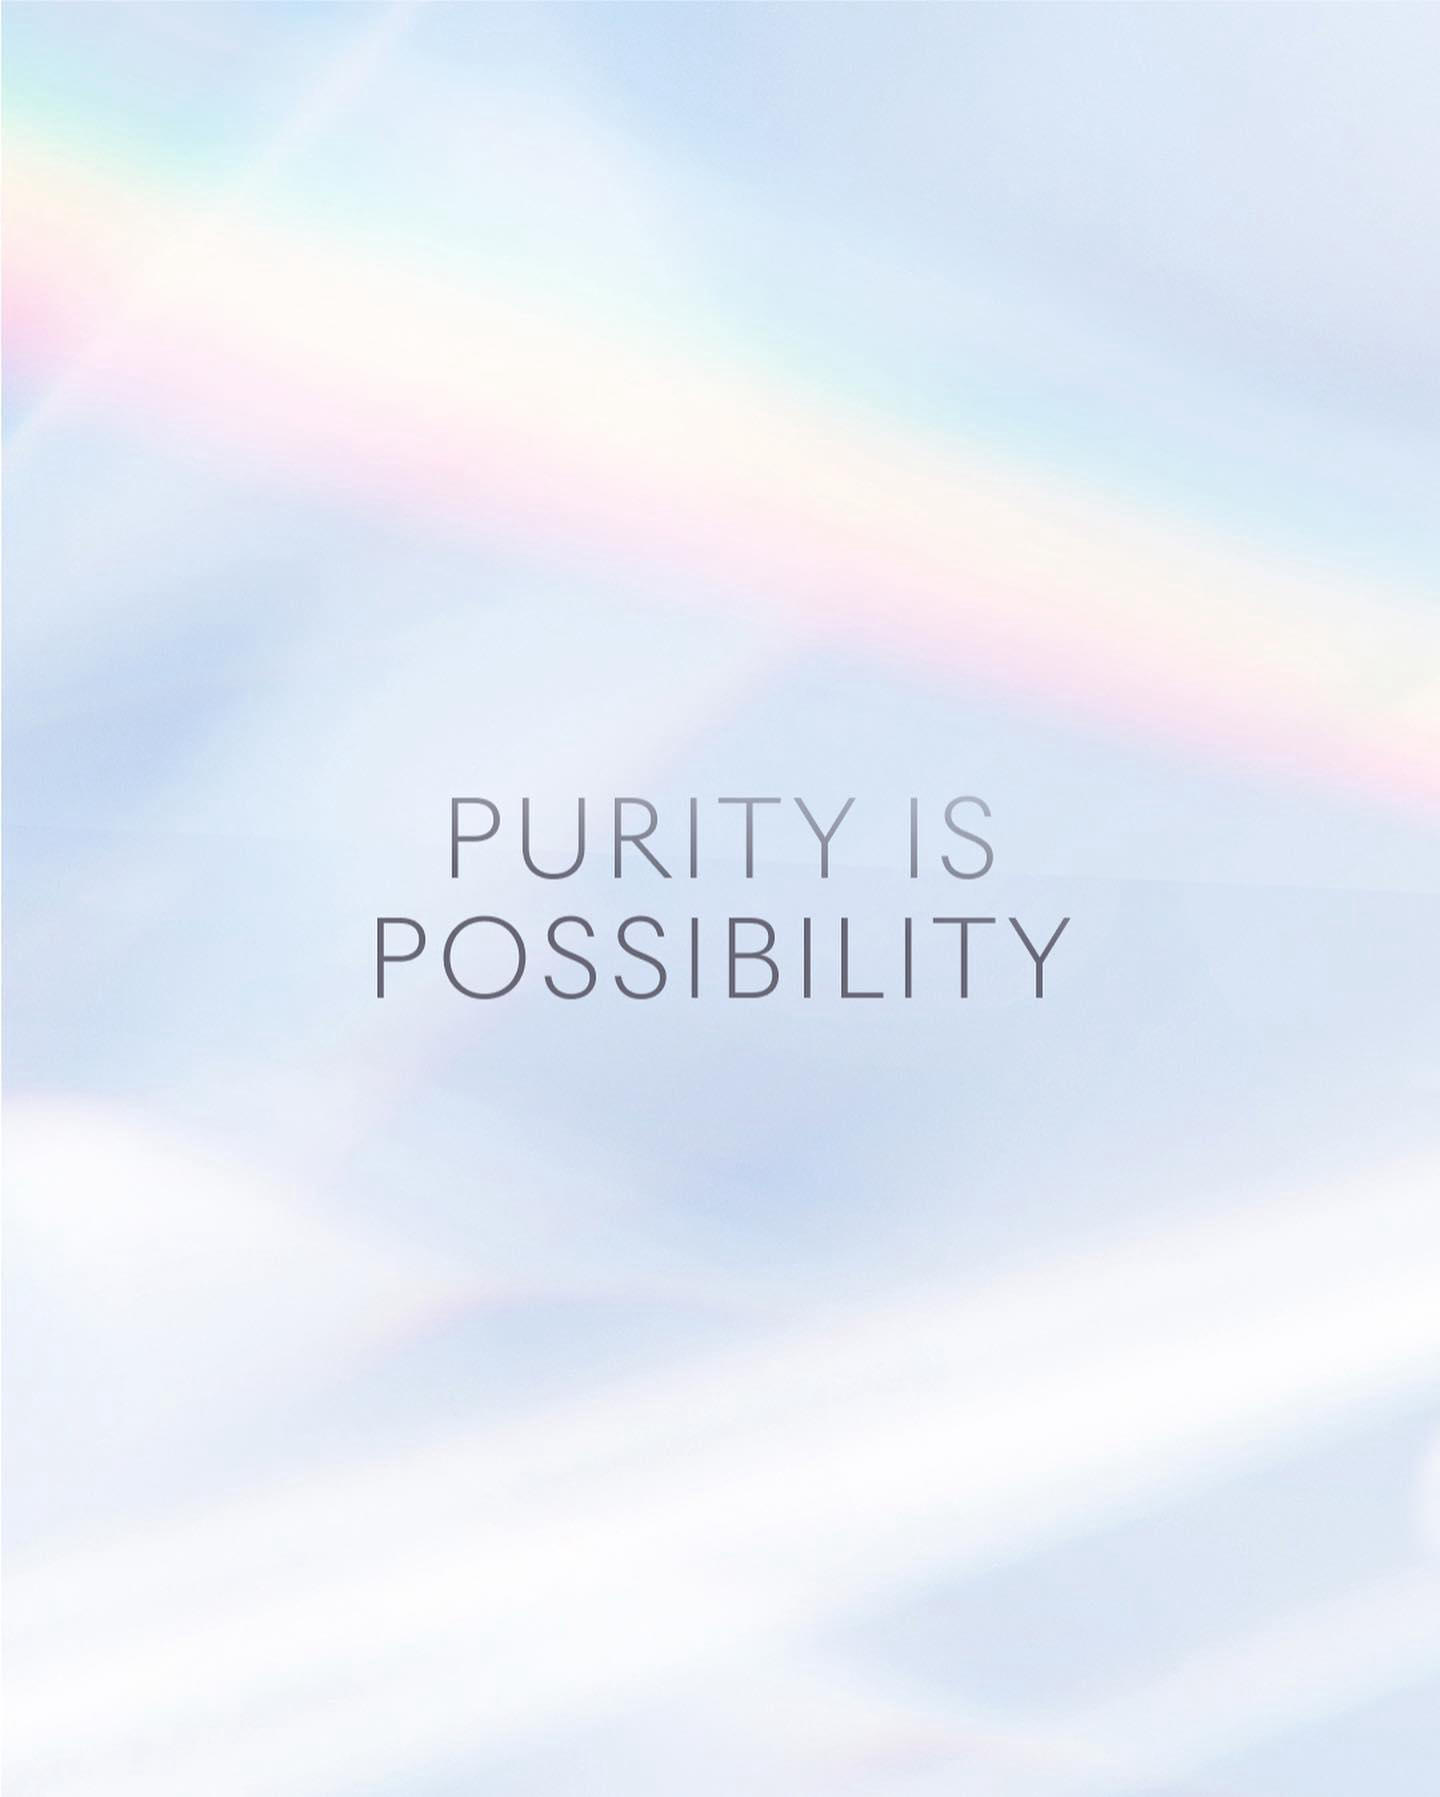 image  1 PURITY IS POSSIBILITYThrough limitless imagination, Ghost’s #Bespoke potential is boundless